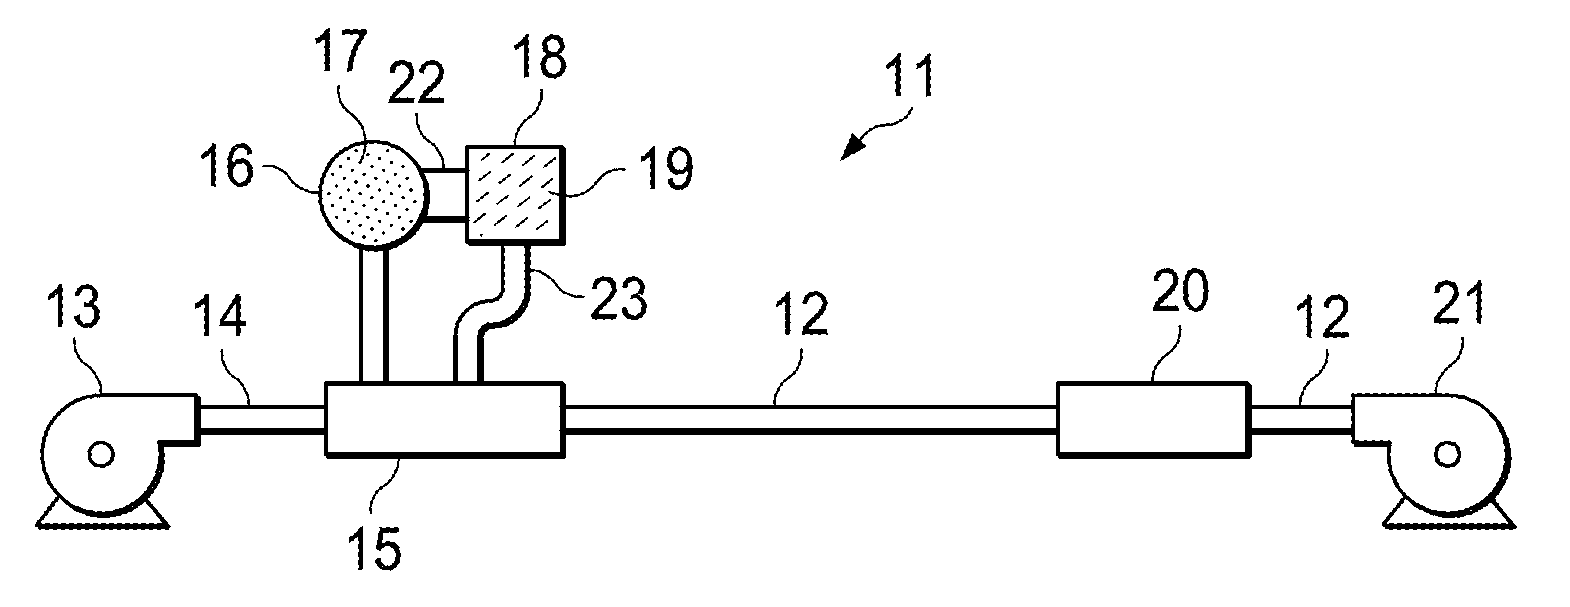 Electrical Cable Having Crosslinked Insulation With Internal Pulling Lubricant